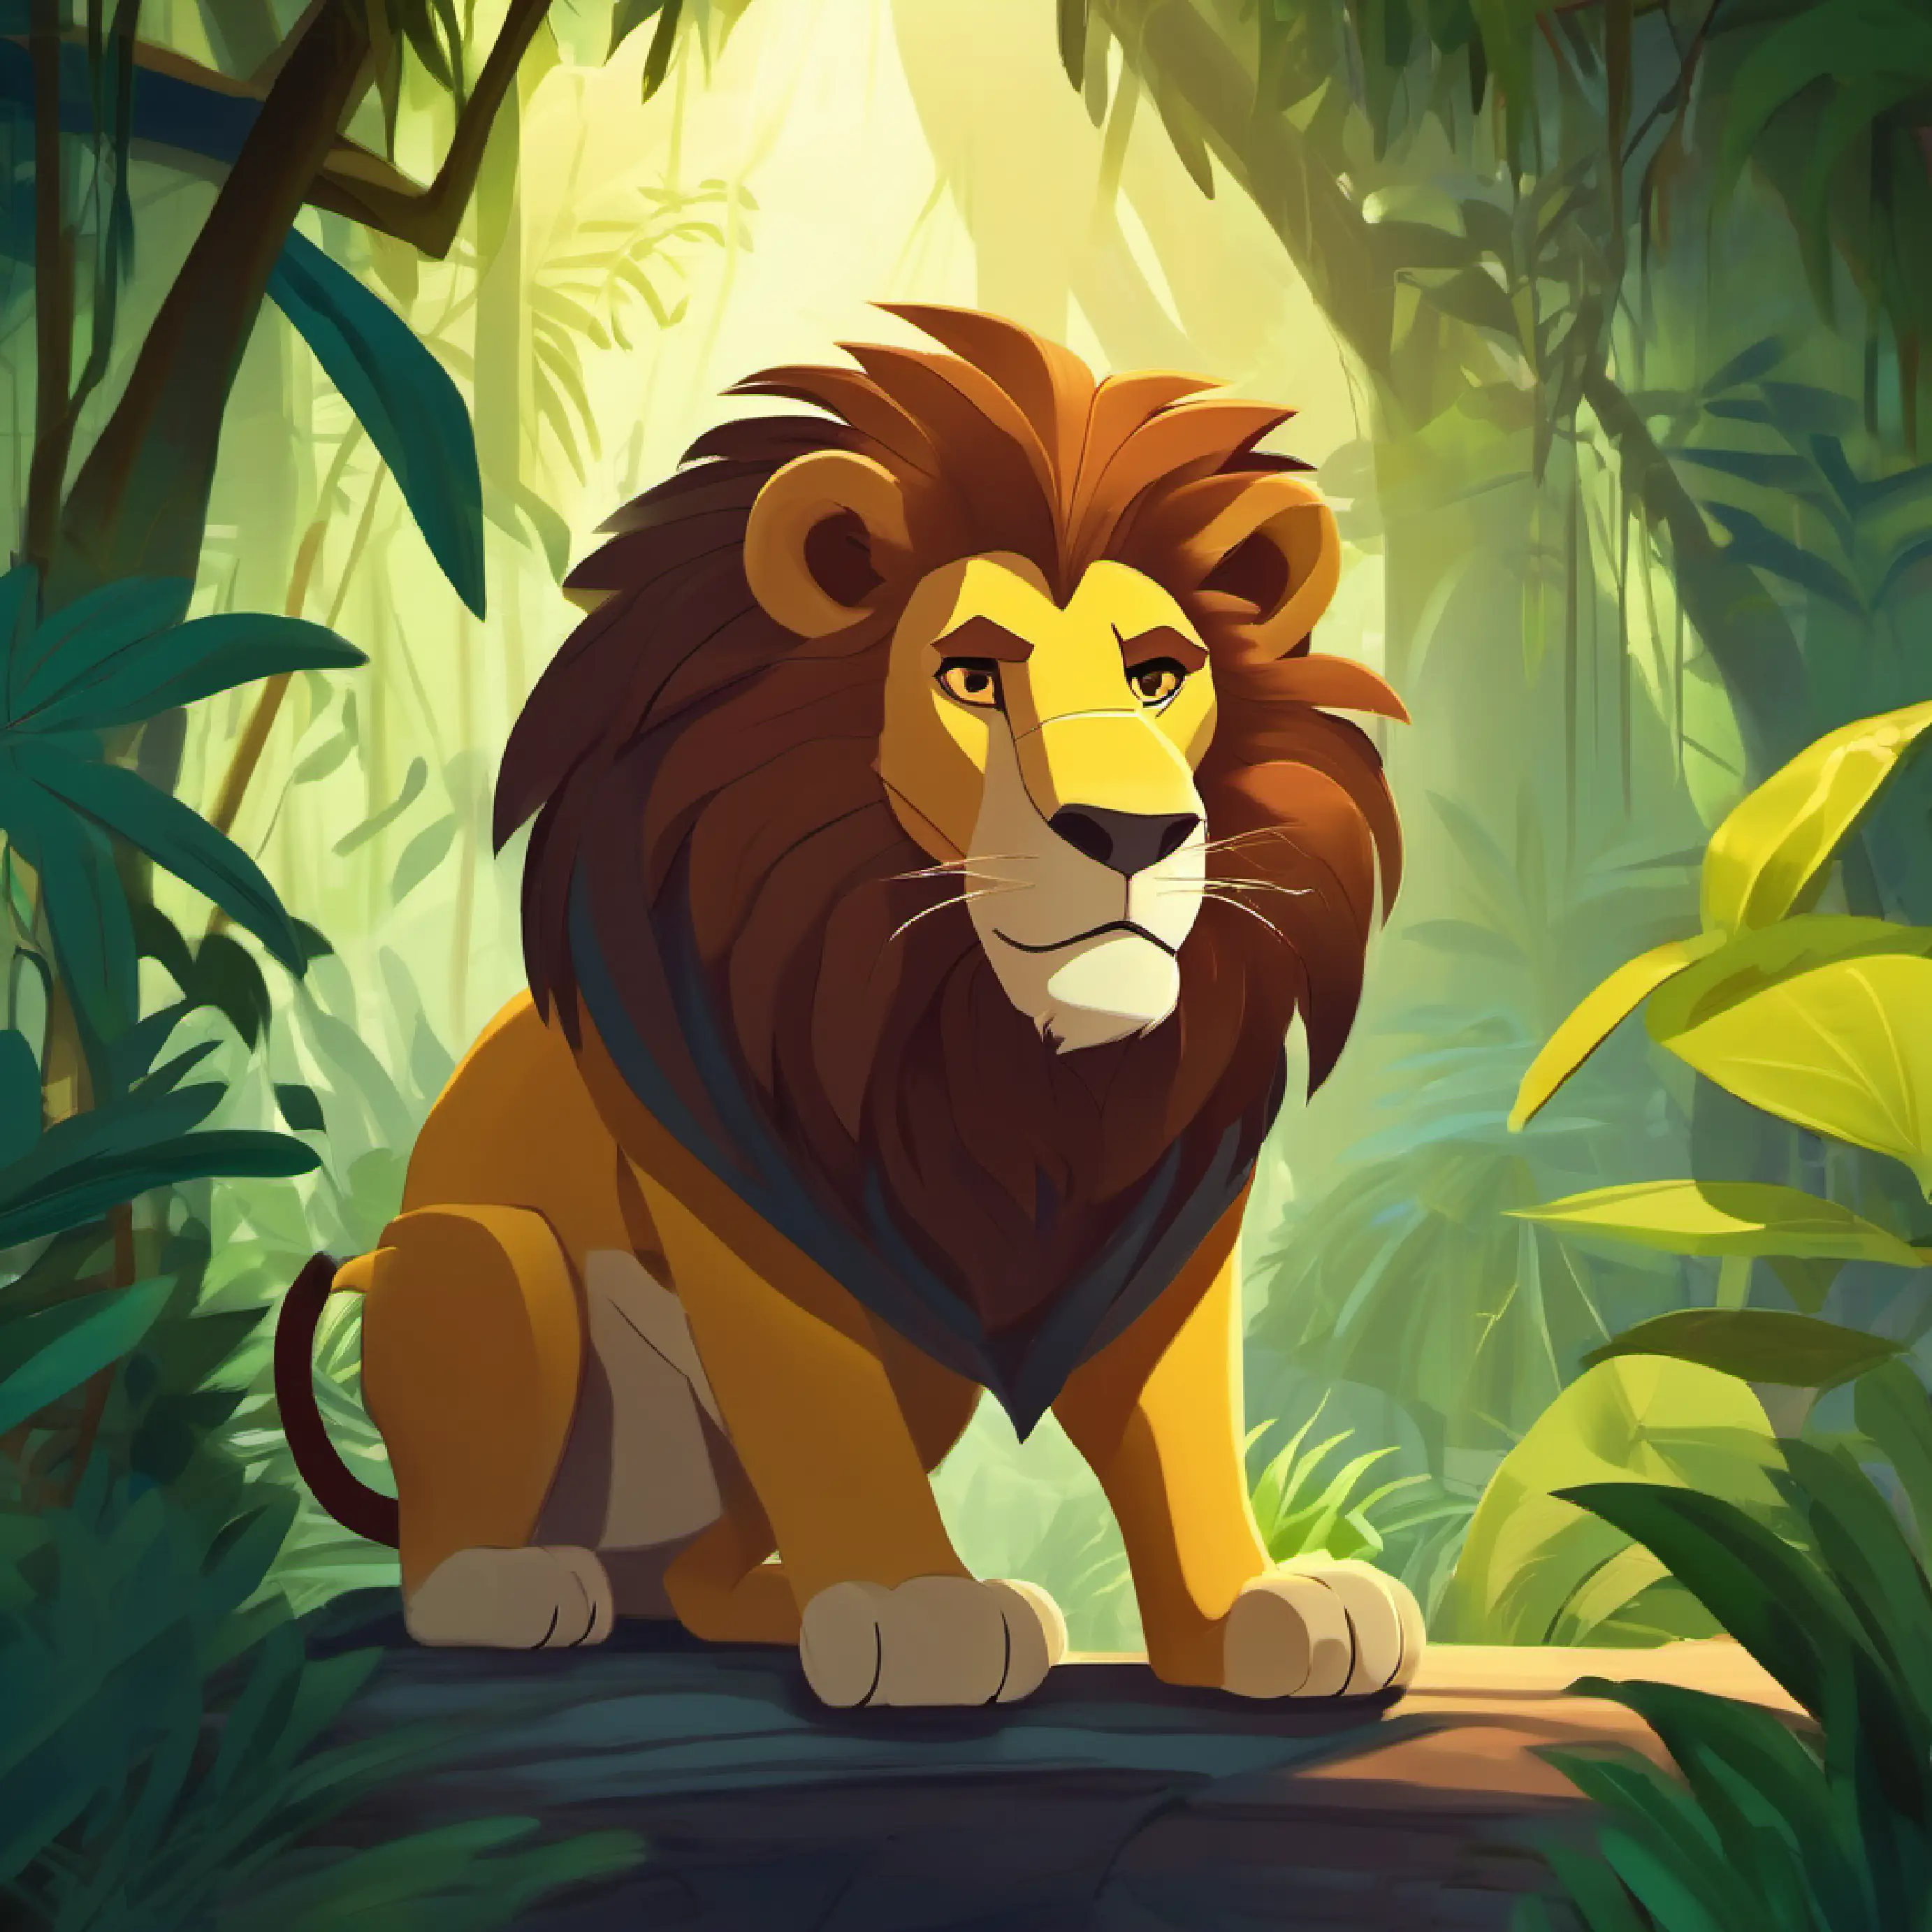 Jungle setting, introducing the main character, the grumpy lion.